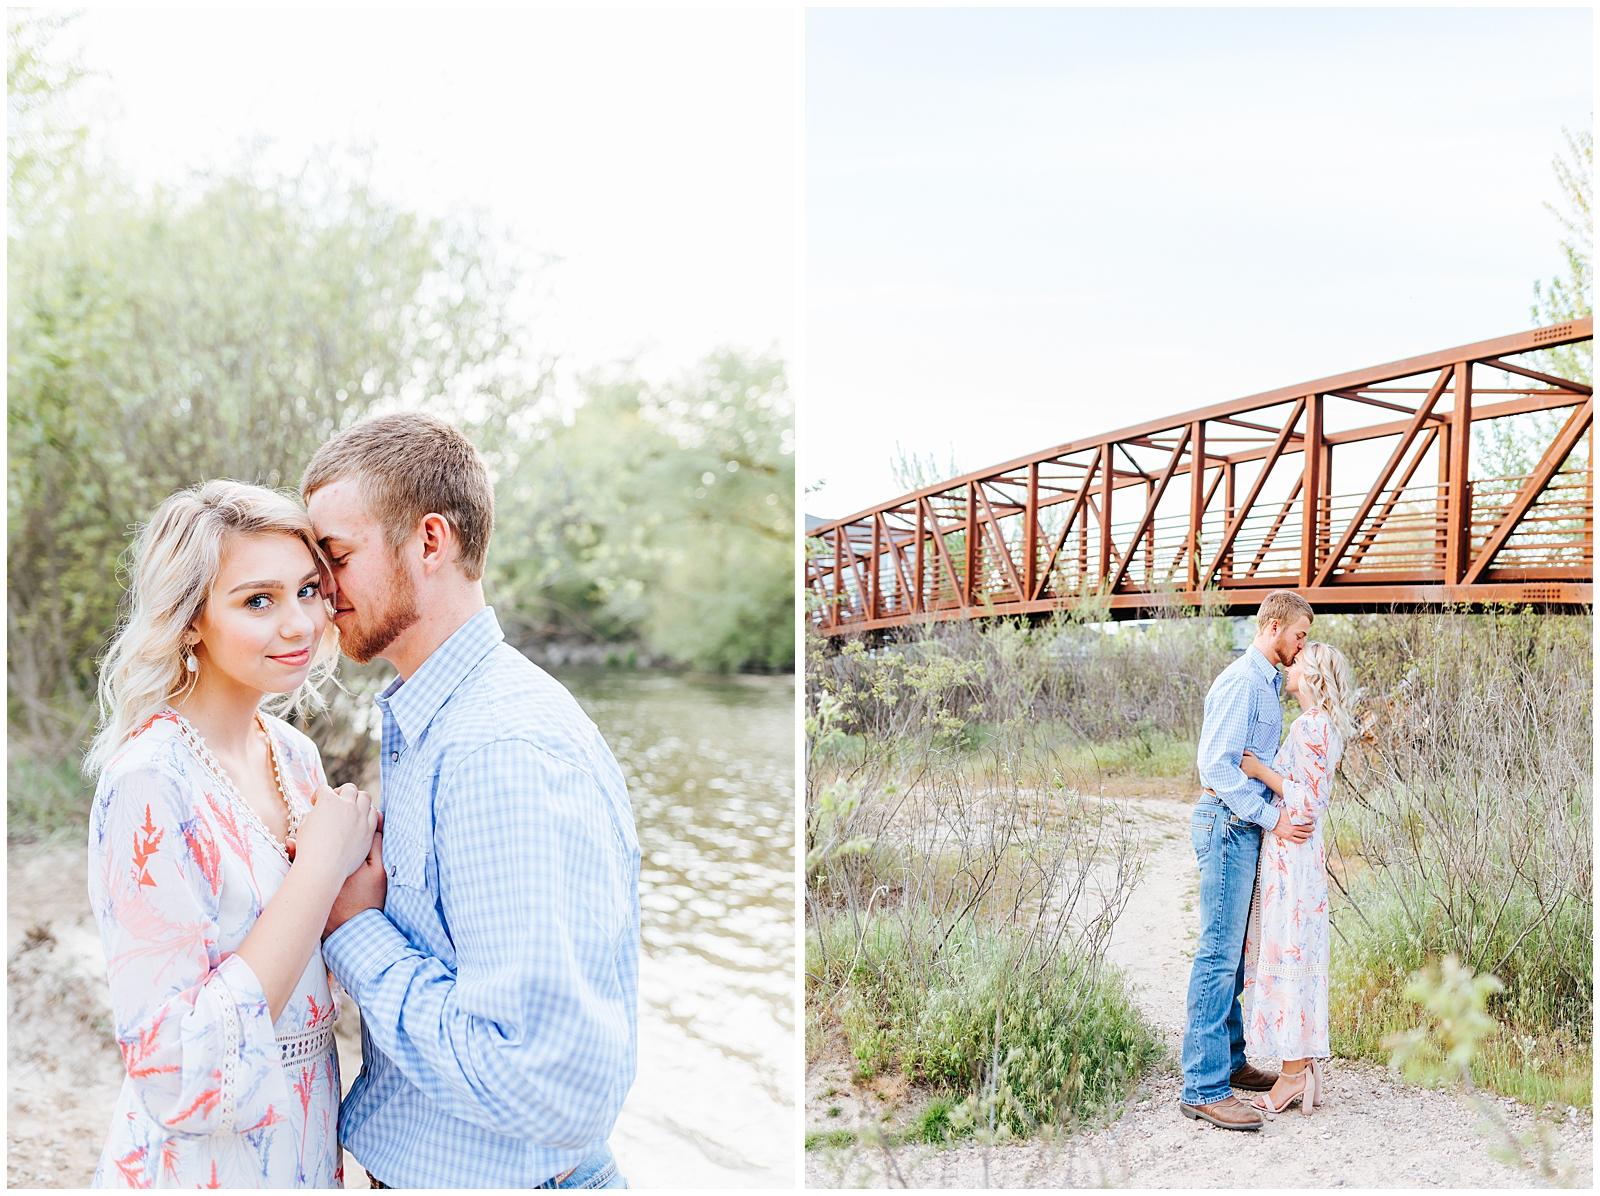 Merrill Park Engagement Session in Eagle Idaho